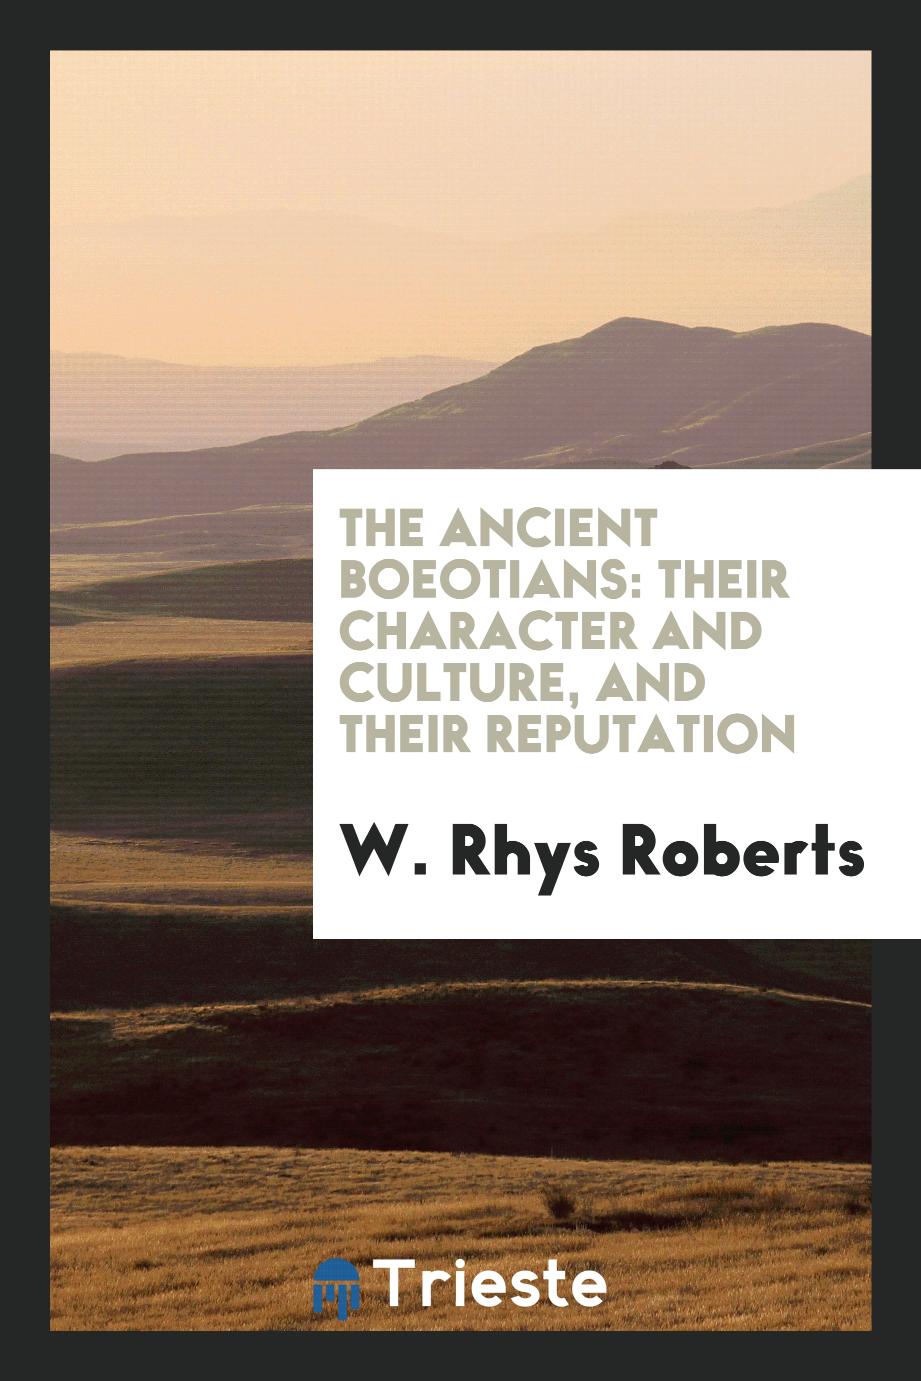 The Ancient Boeotians: Their Character and Culture, and Their Reputation